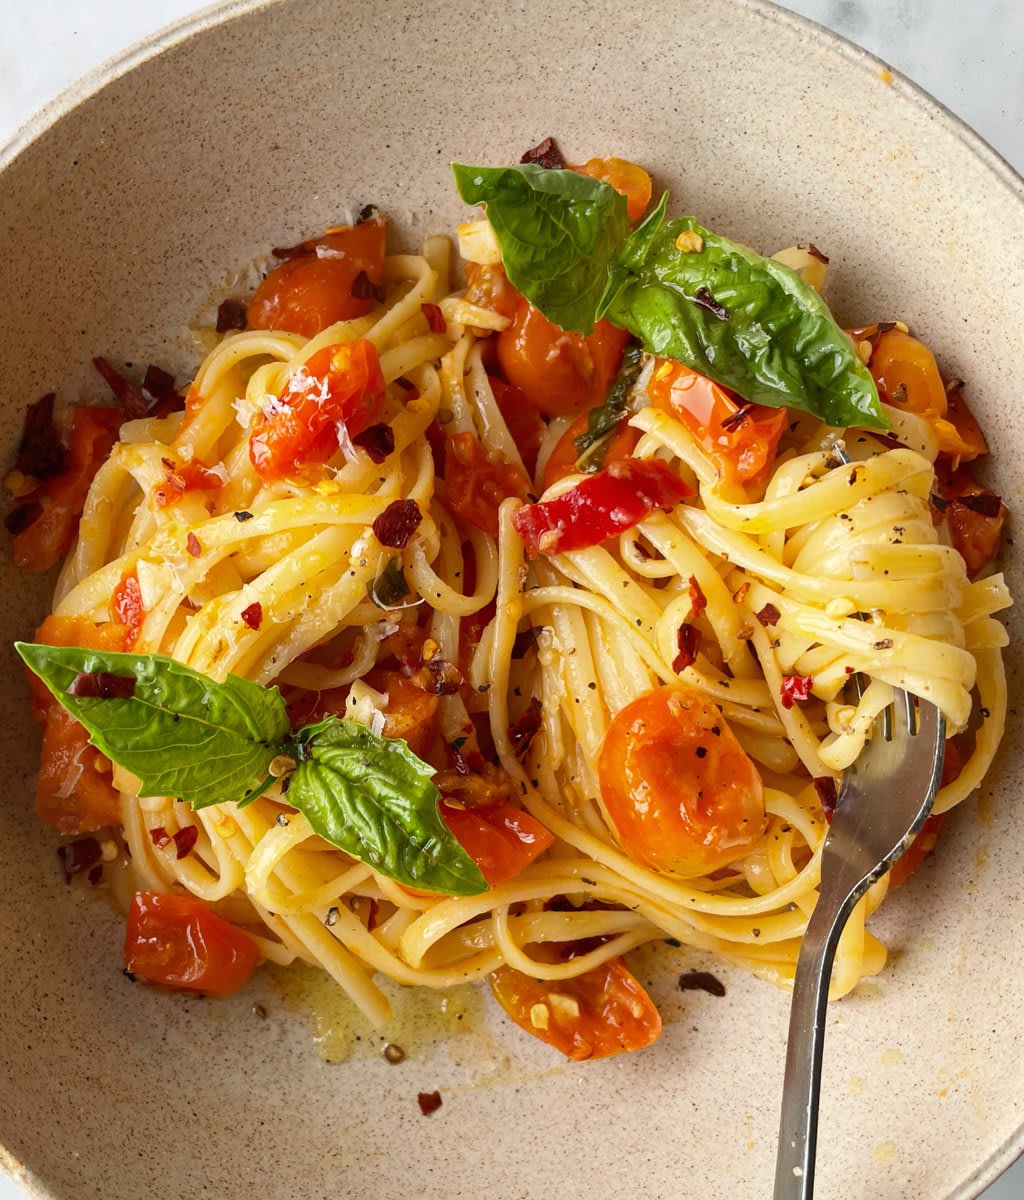 @the_pastaqueen's “The Cobbler's Wife” spaghetti is as simple as it is delicious: